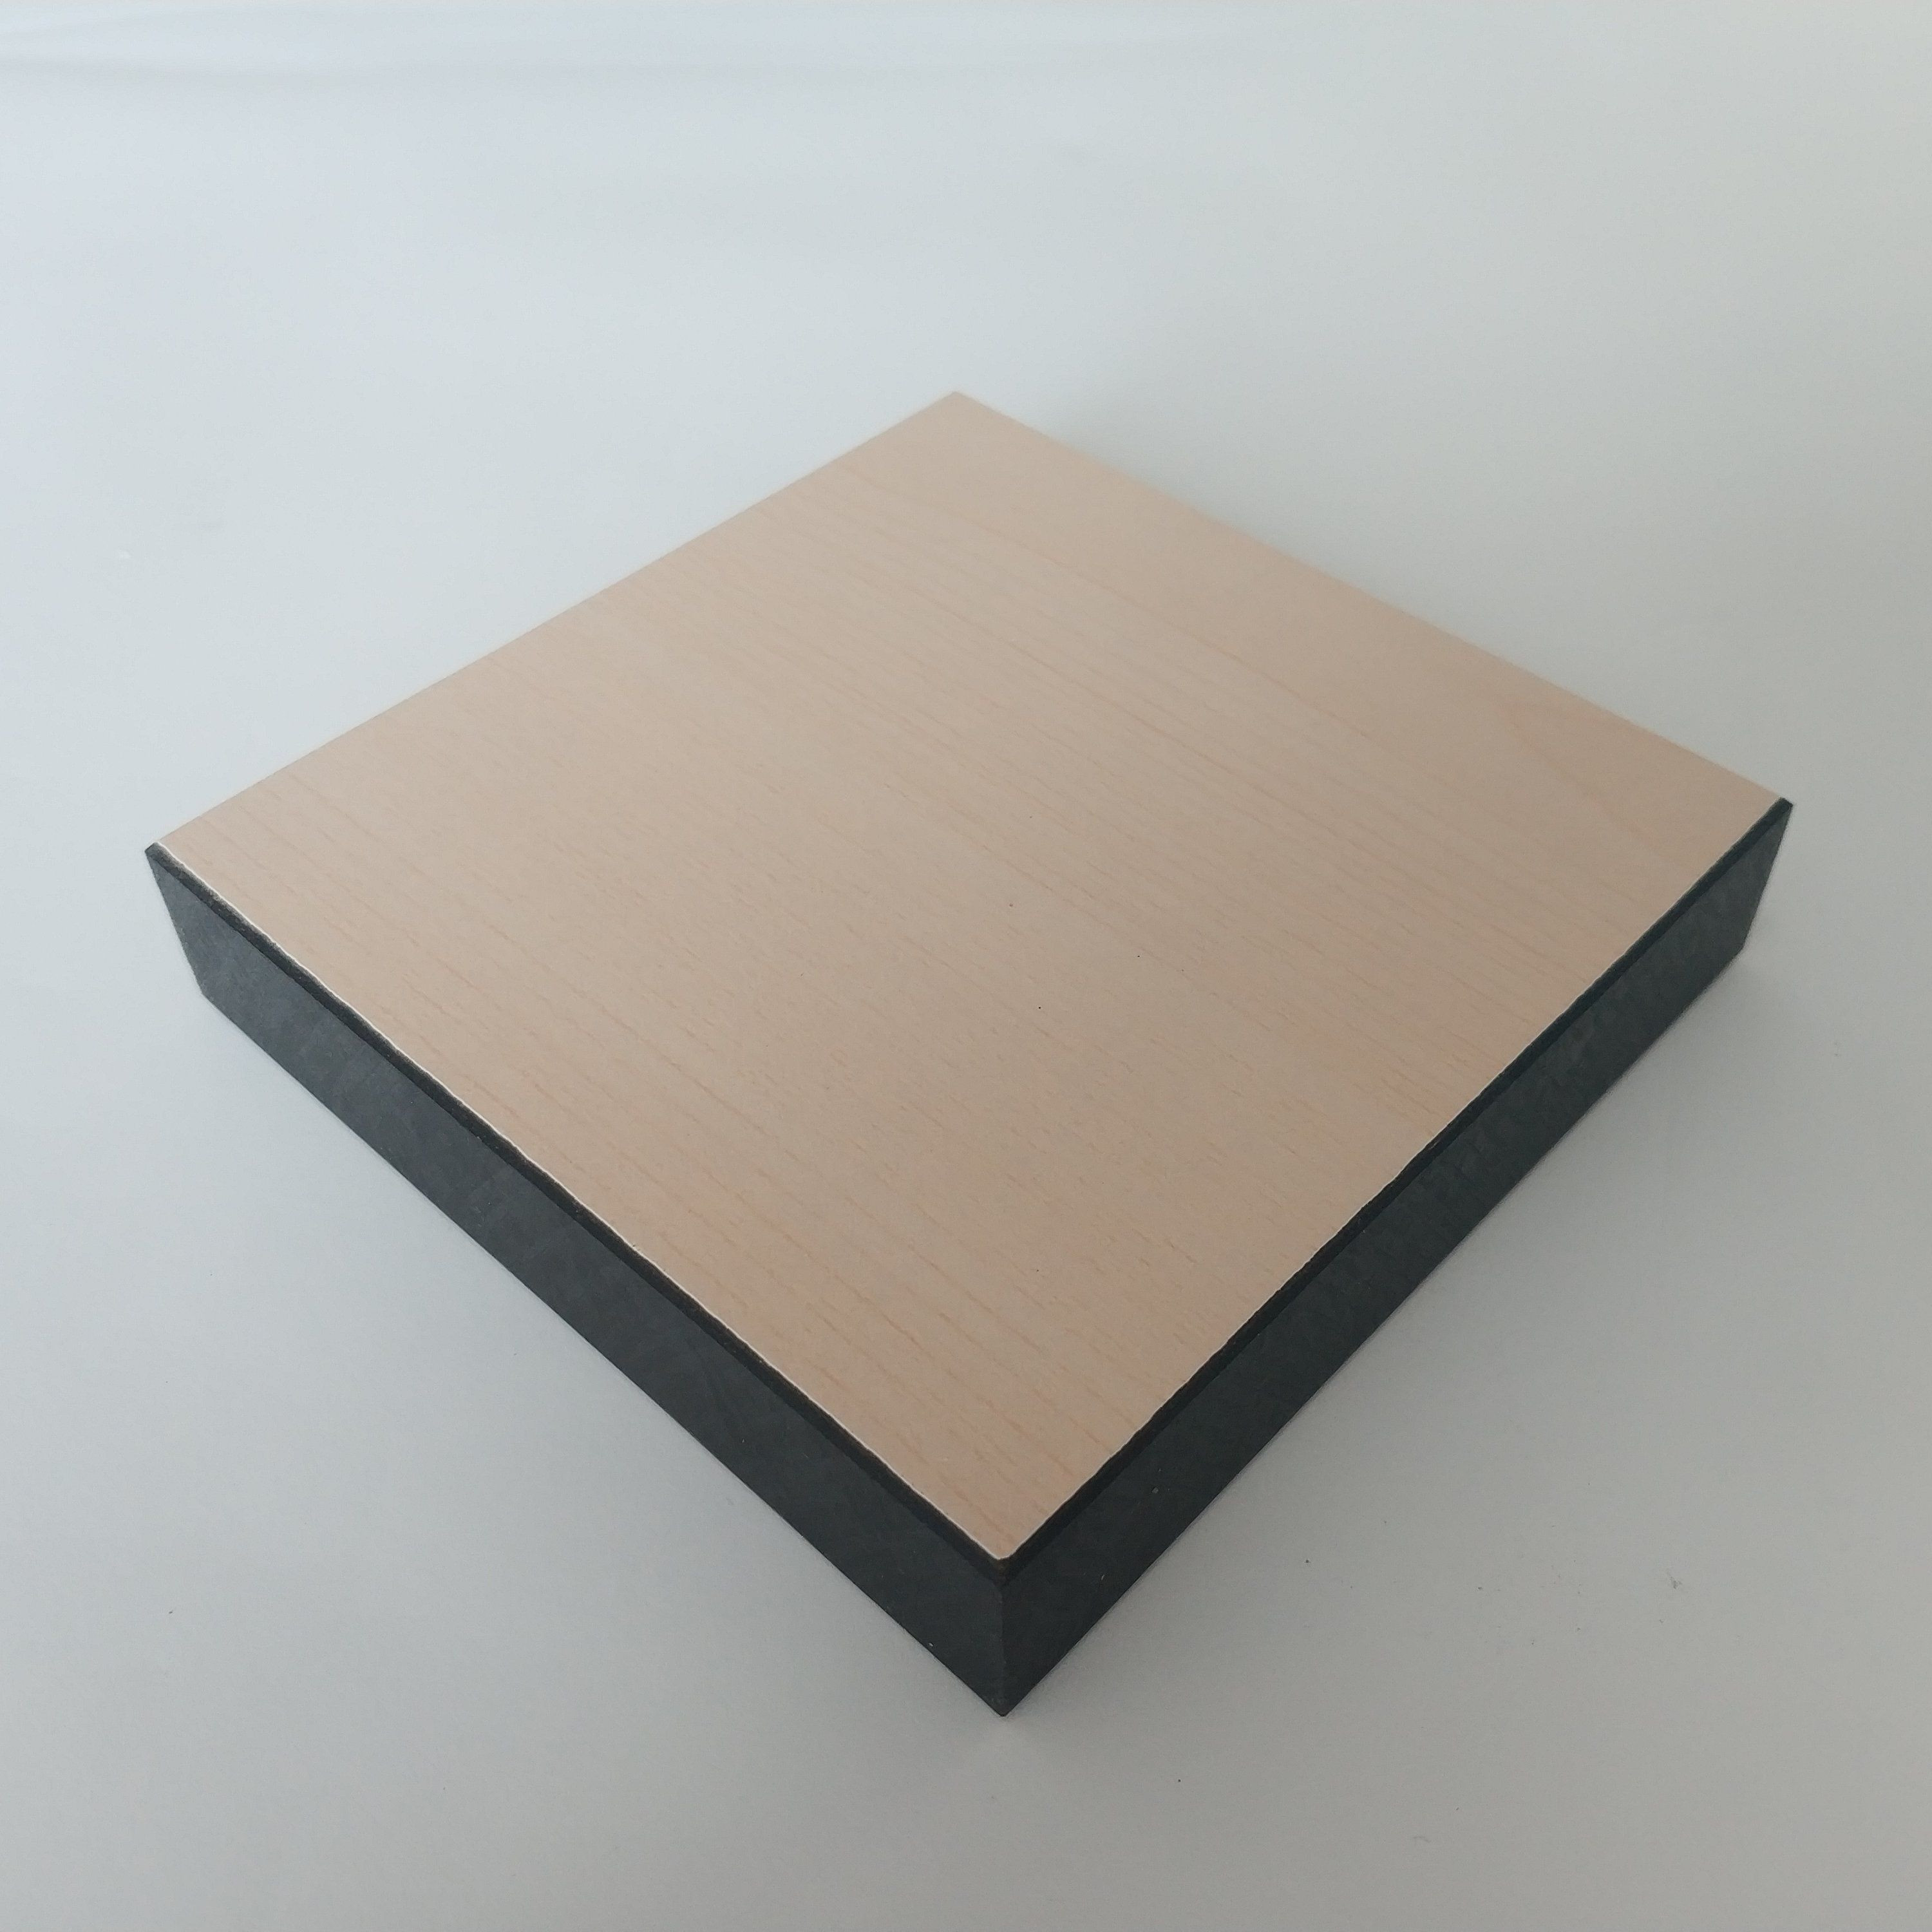 Hot selling black core compact laminate 8mm formica sheet hpl compact hpl with low price